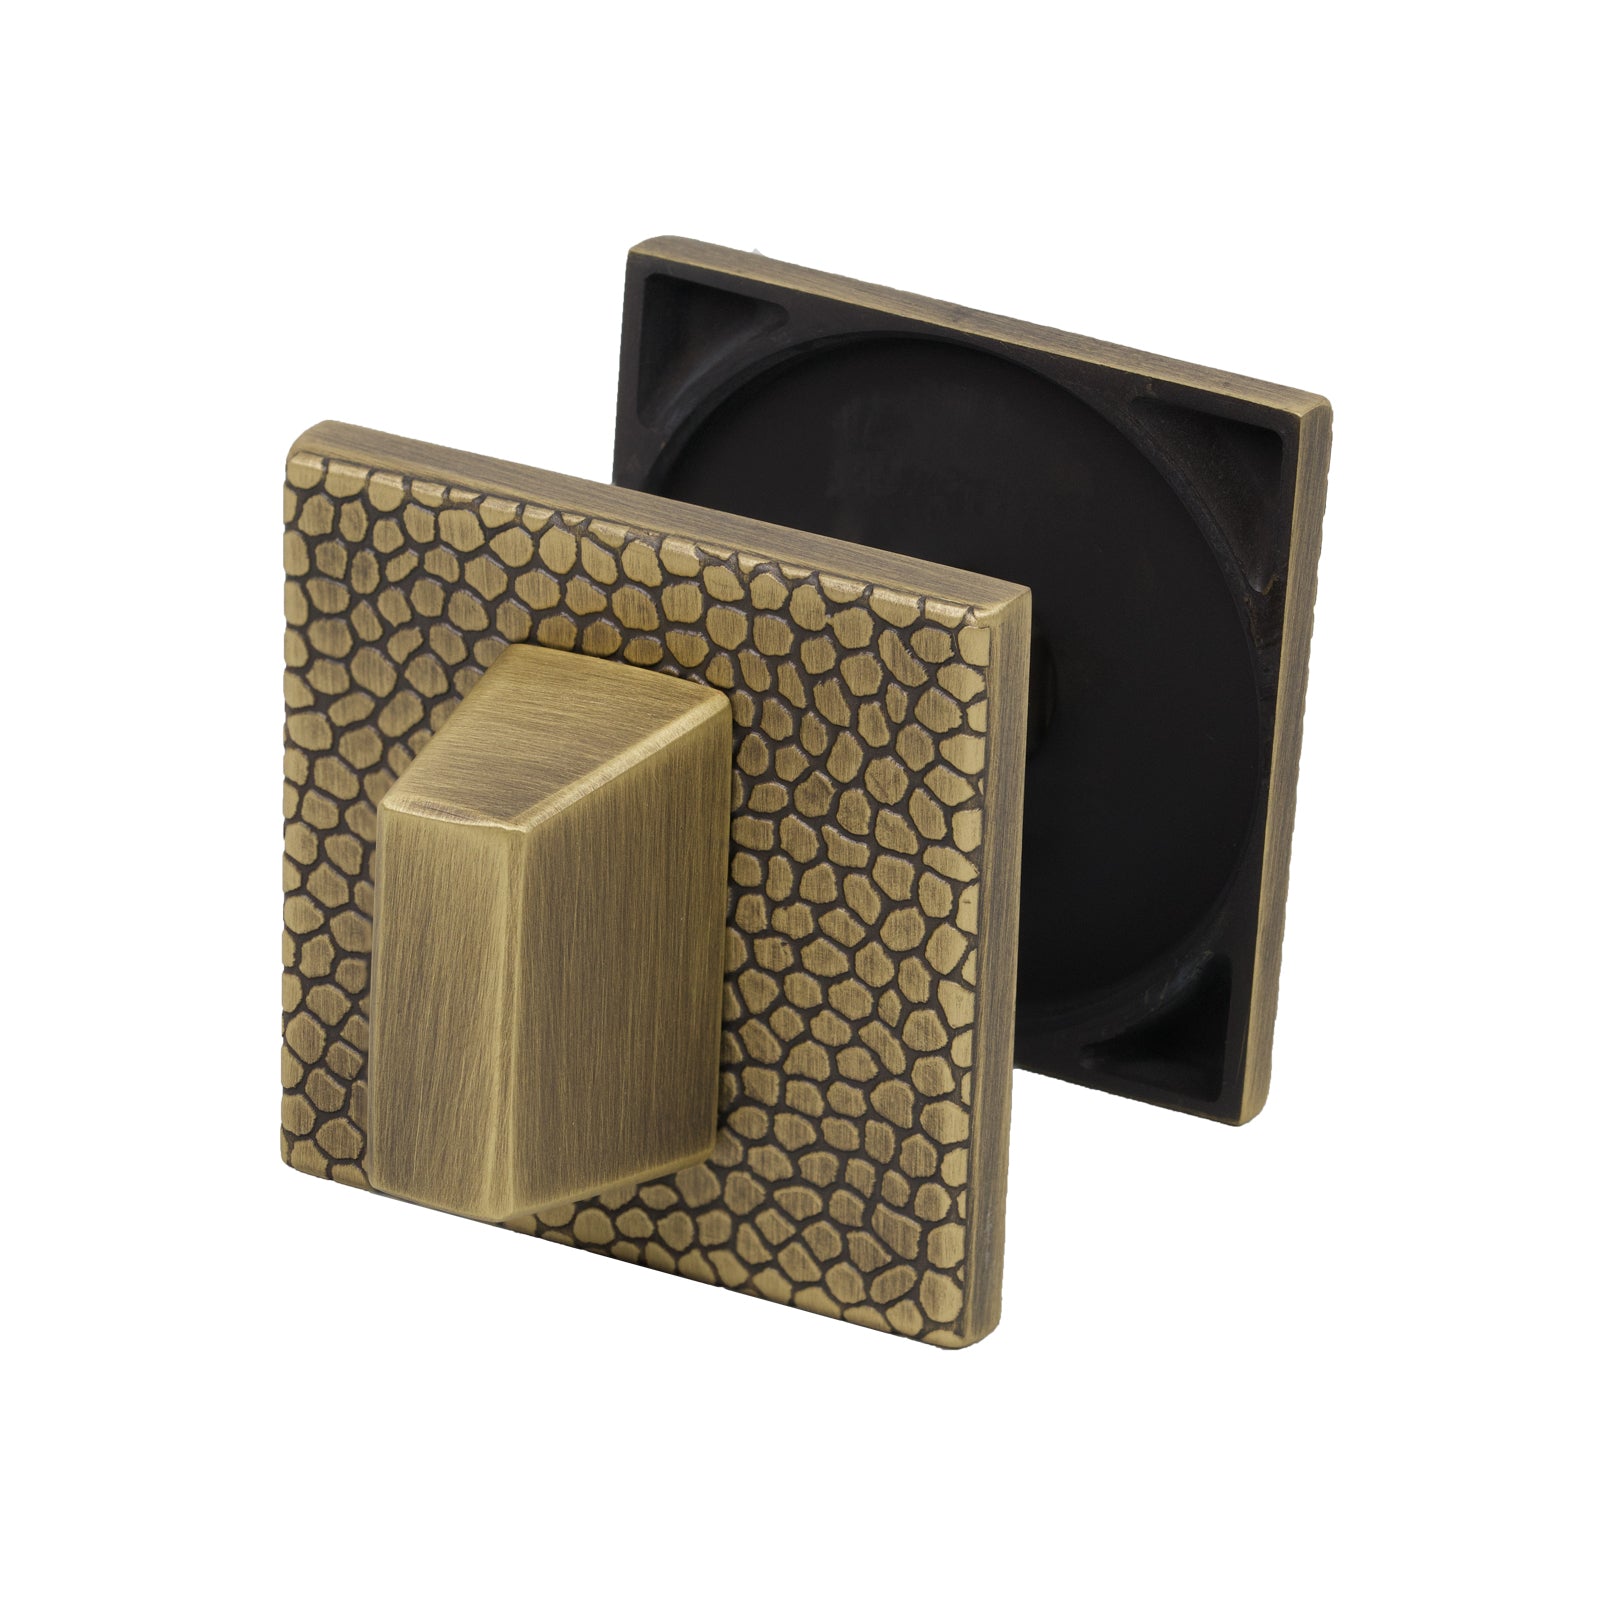 Tupai Pebbles bathroom turn and release in Antique Brass Finish SHOW